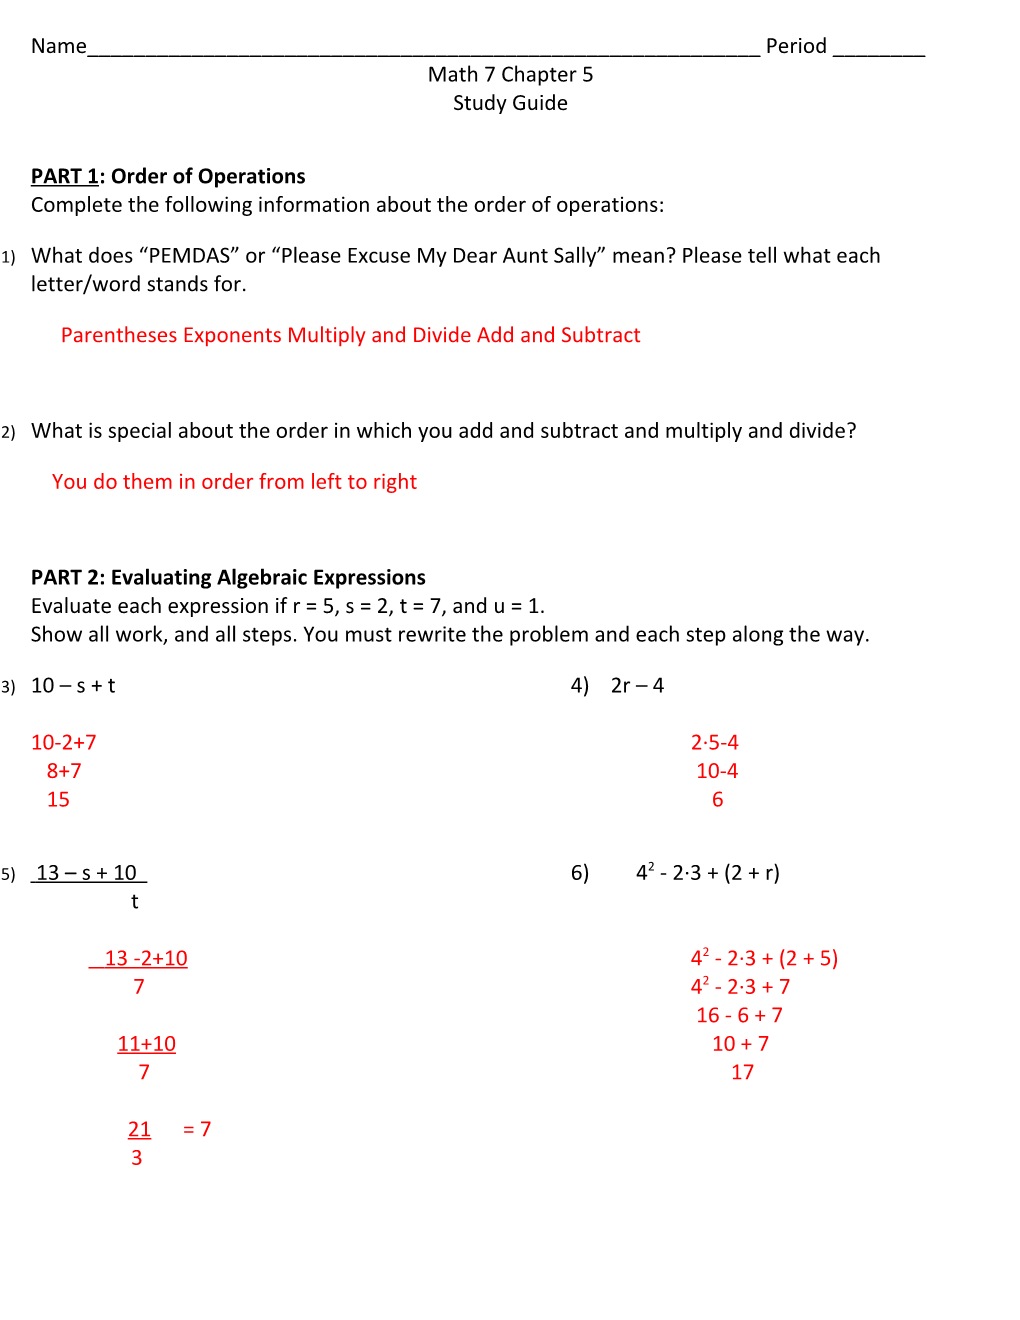 Copy of Algebraic Expressions Study Guide for Math 7